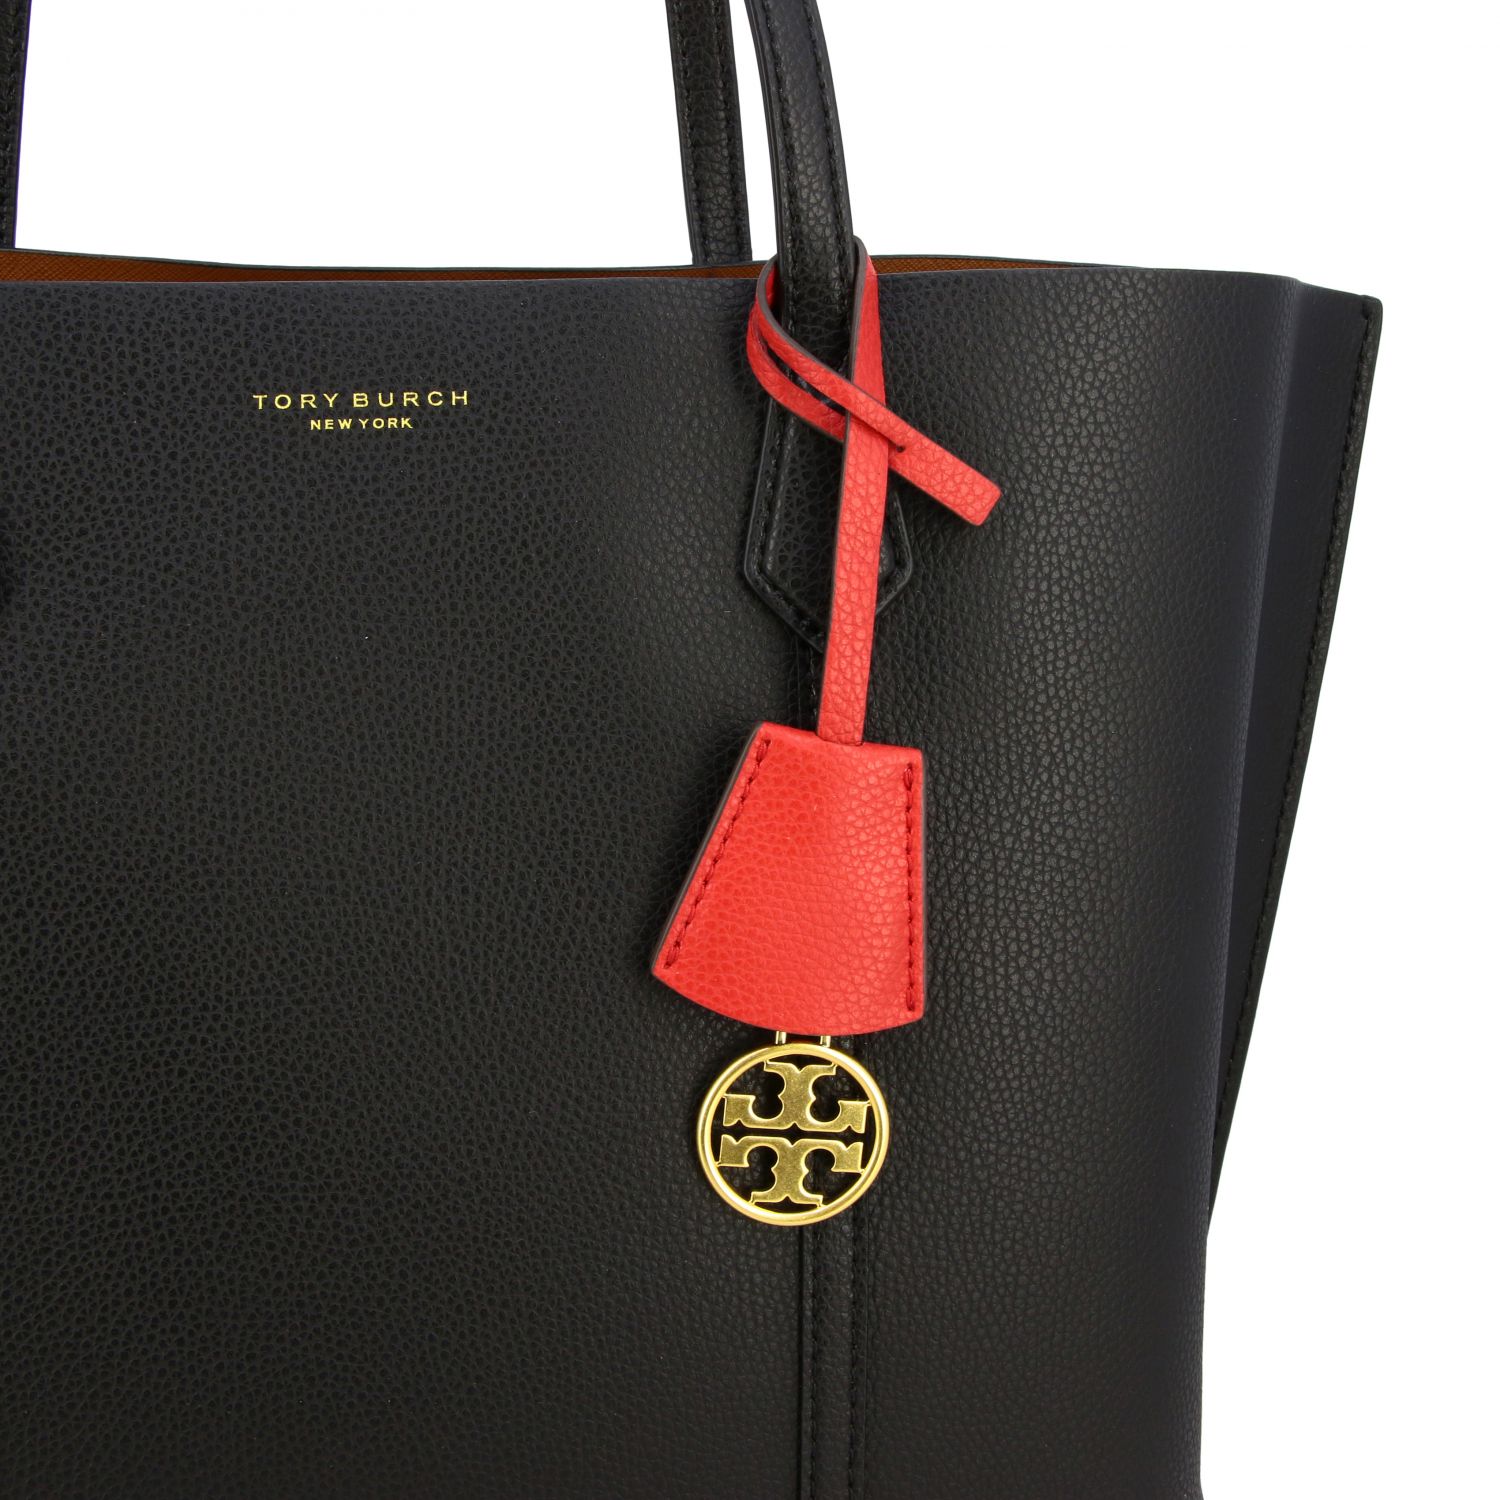 Tory Burch Outlet: Perry tote bag in textured leather - Black | Tote ...